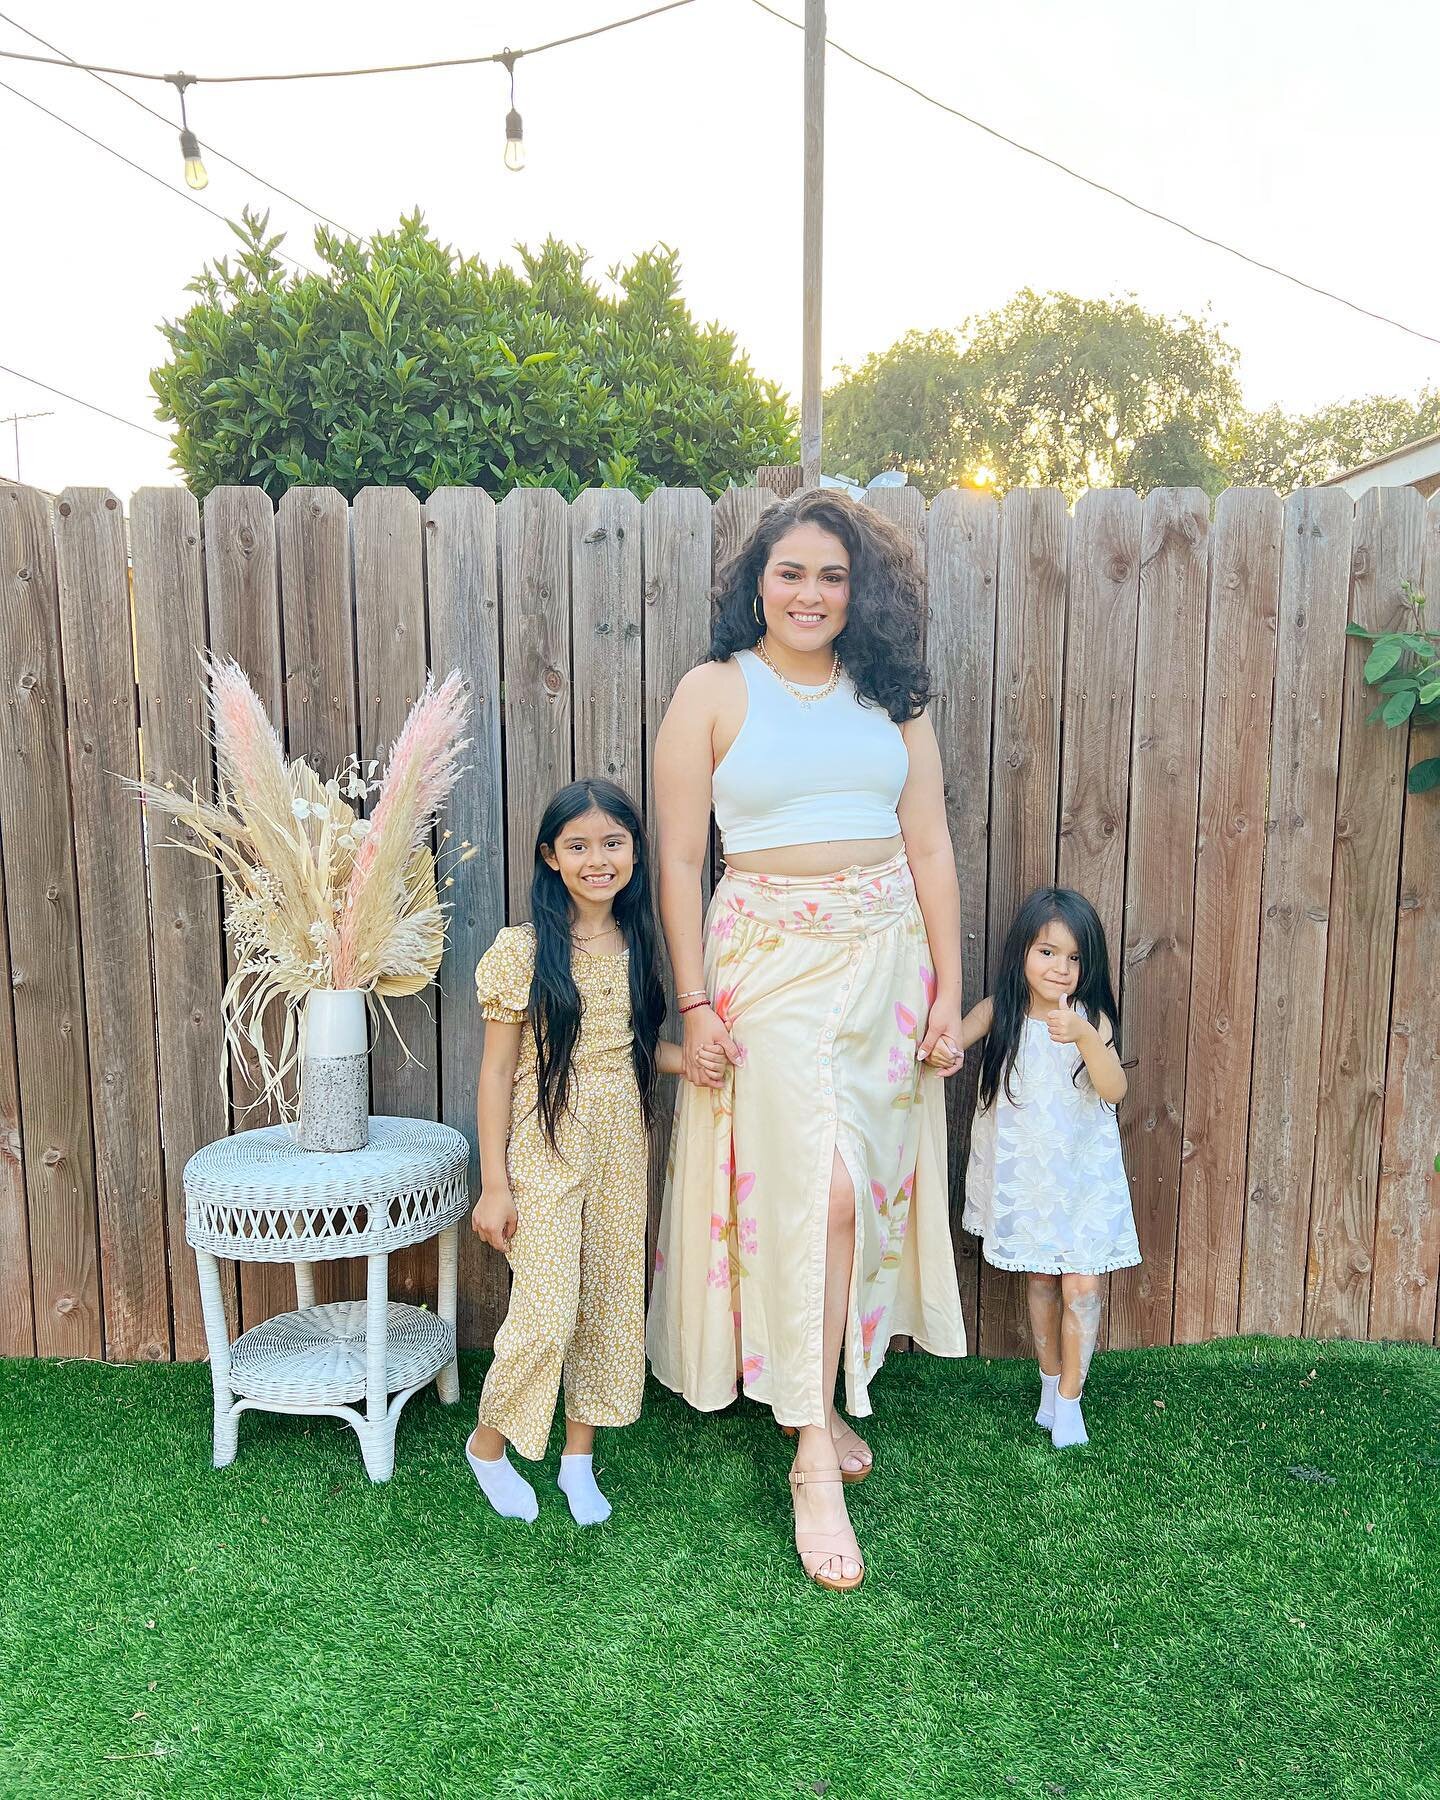 I hope you all had a wonderful Mother&rsquo;s Day celebrating yourselves, and the mamas in your lives!!🥰🤗💕

Who is also having a hard time this Monday?!🤪 I need a full rest day!✨

#latinacontentcreator #curlyhair #womenentrepreneurs #losangeles  